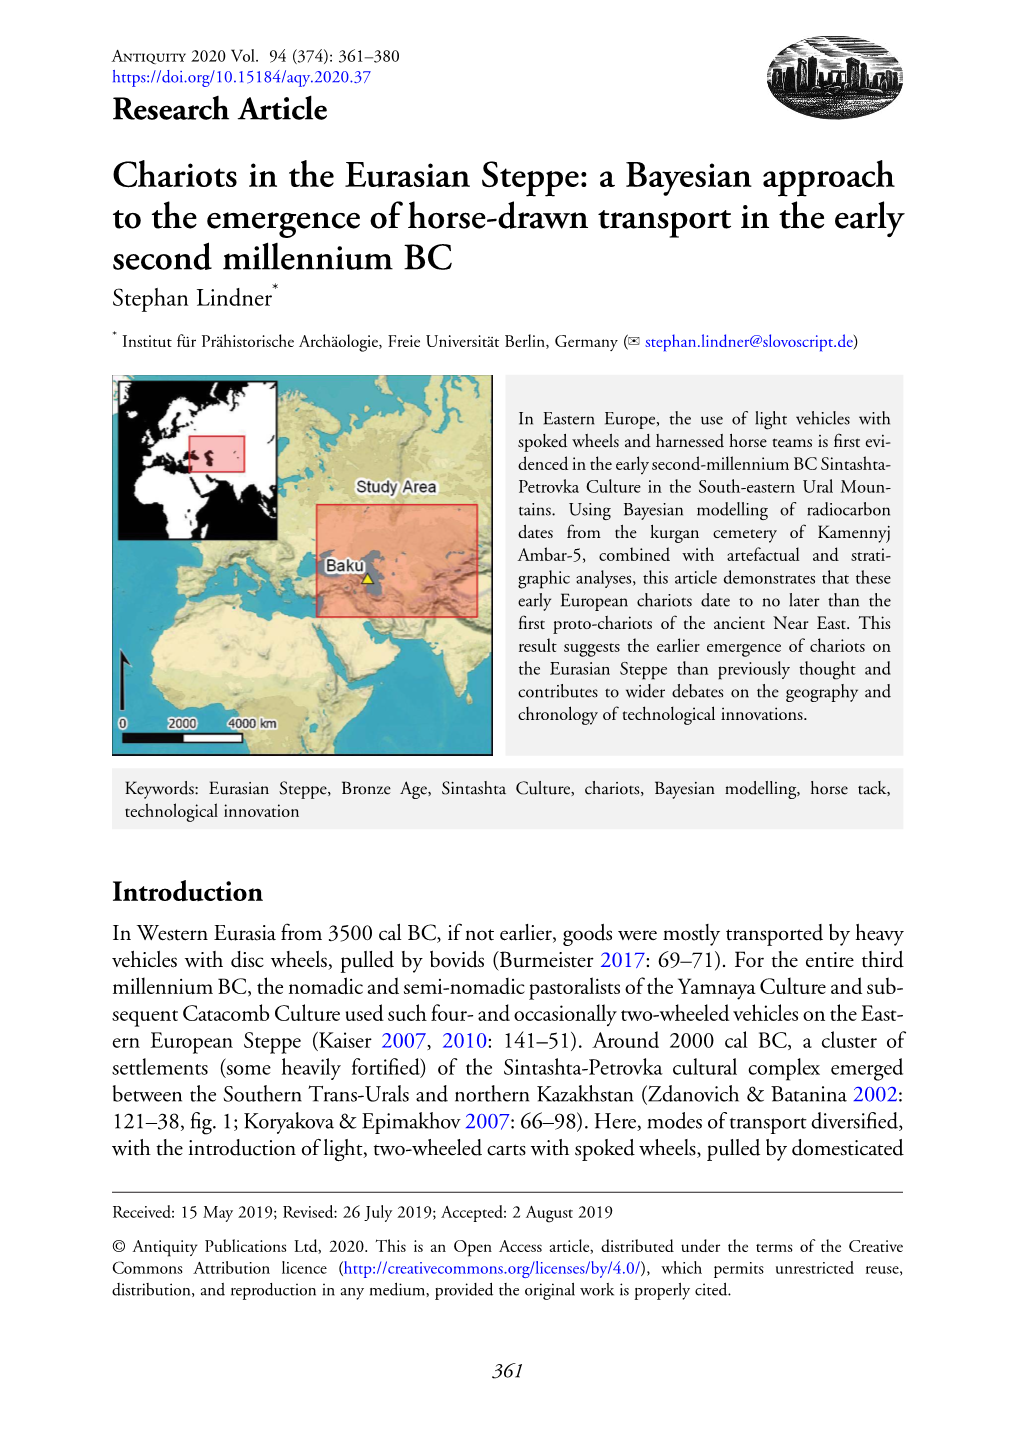 Chariots in the Eurasian Steppe: a Bayesian Approach to the Emergence of Horse-Drawn Transport in the Early Second Millennium BC Stephan Lindner*